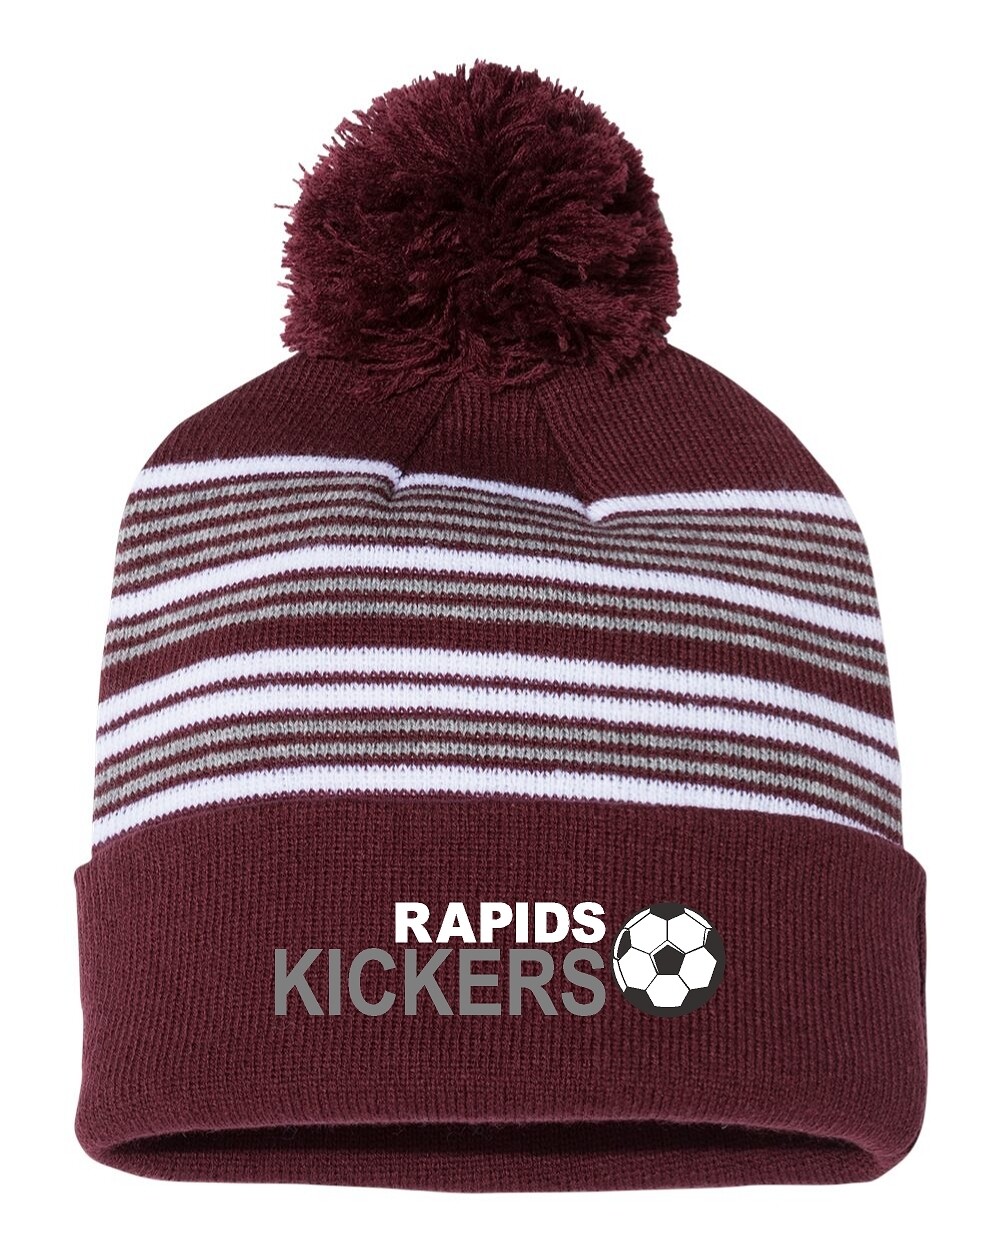 Sportsman - 12&quot; Striped Pom-Pom Cuffed Beanie - Maroon/Grey/White WITH EMBROIDERED LOGO - Kickers Soccer